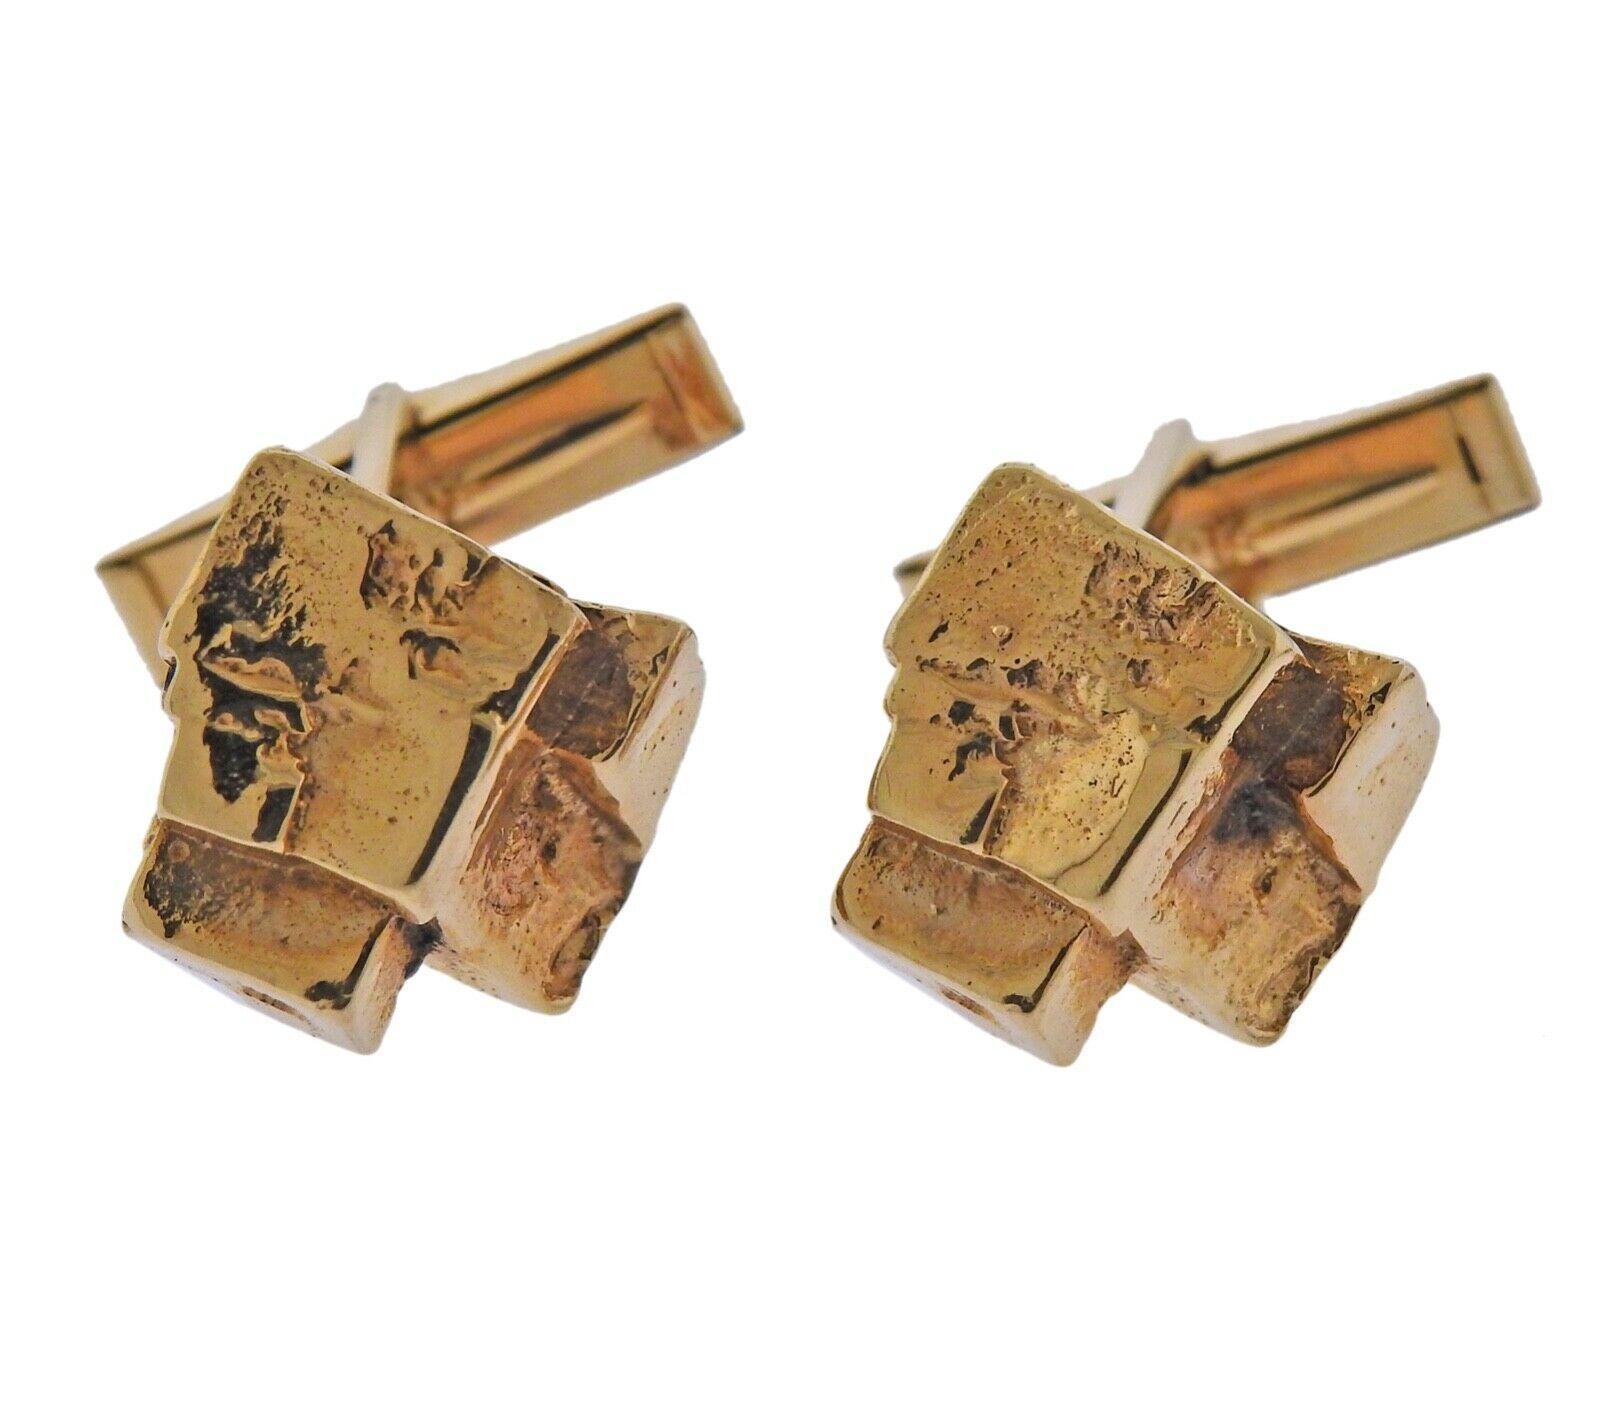 14k yellow gold nugget cufflinks stud set. Cufflinks tops measure approximately 14mm x 12mm. Studs measure 8mm x 10mm. Tested- 14k. Weight - 39.1 grams. 
